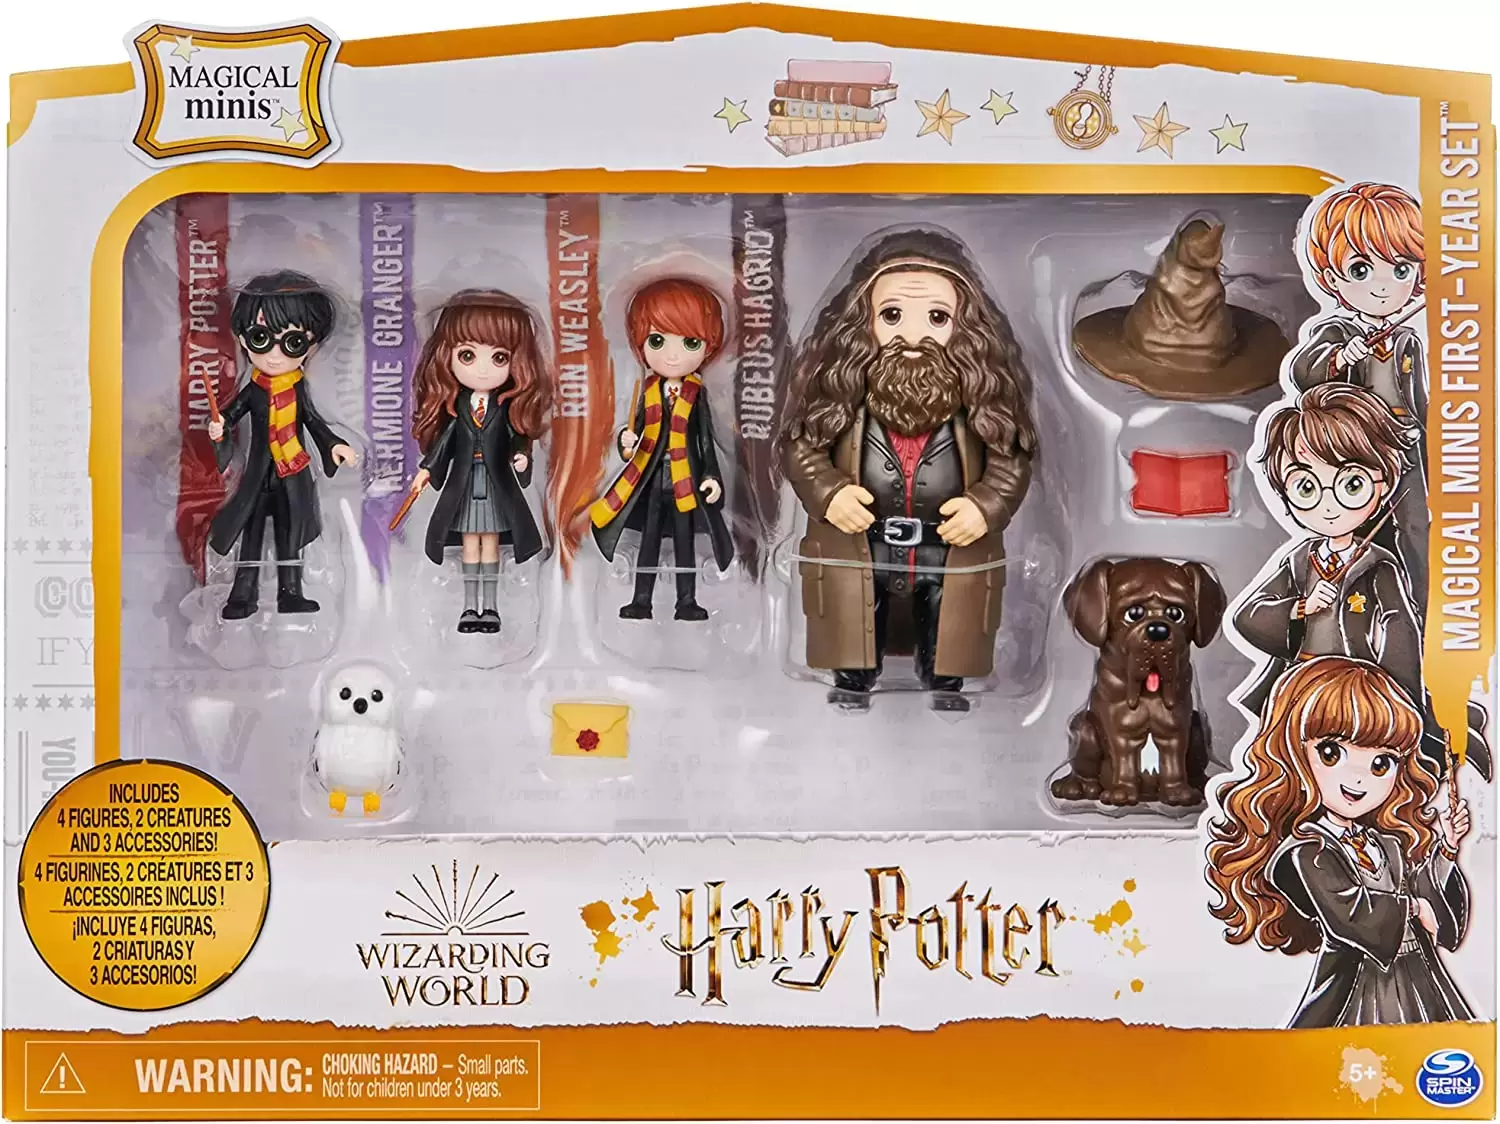 Wizarding World, Magical Minis Harry Potter and Cho Chang Friendship Set  with Creature, Kids Toys for Ages 5 and up